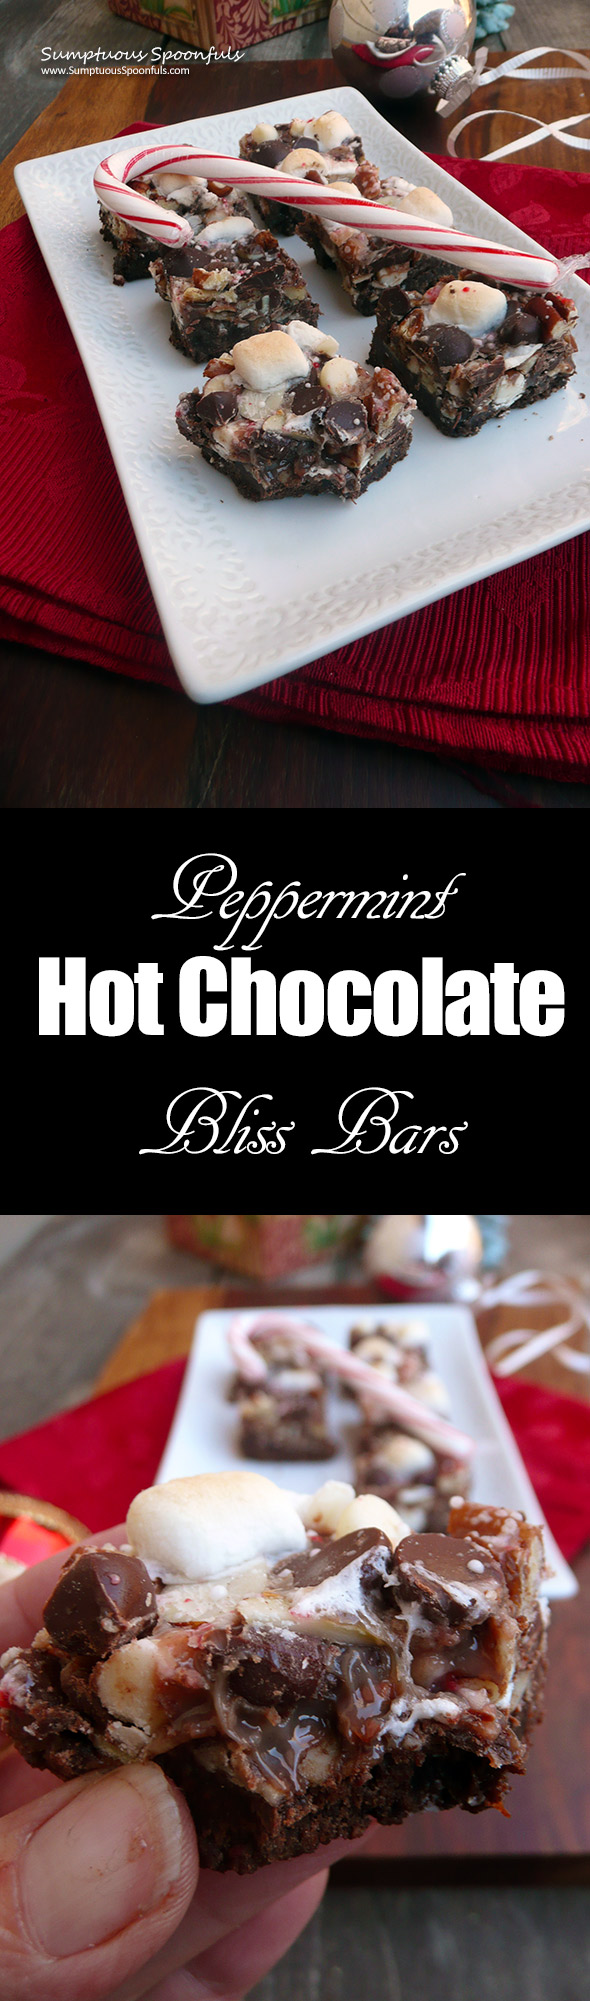 Peppermint Hot Chocolate Bliss Bars ~ Sumptuous Spoonfuls #gooey #chocolate #mint #bars